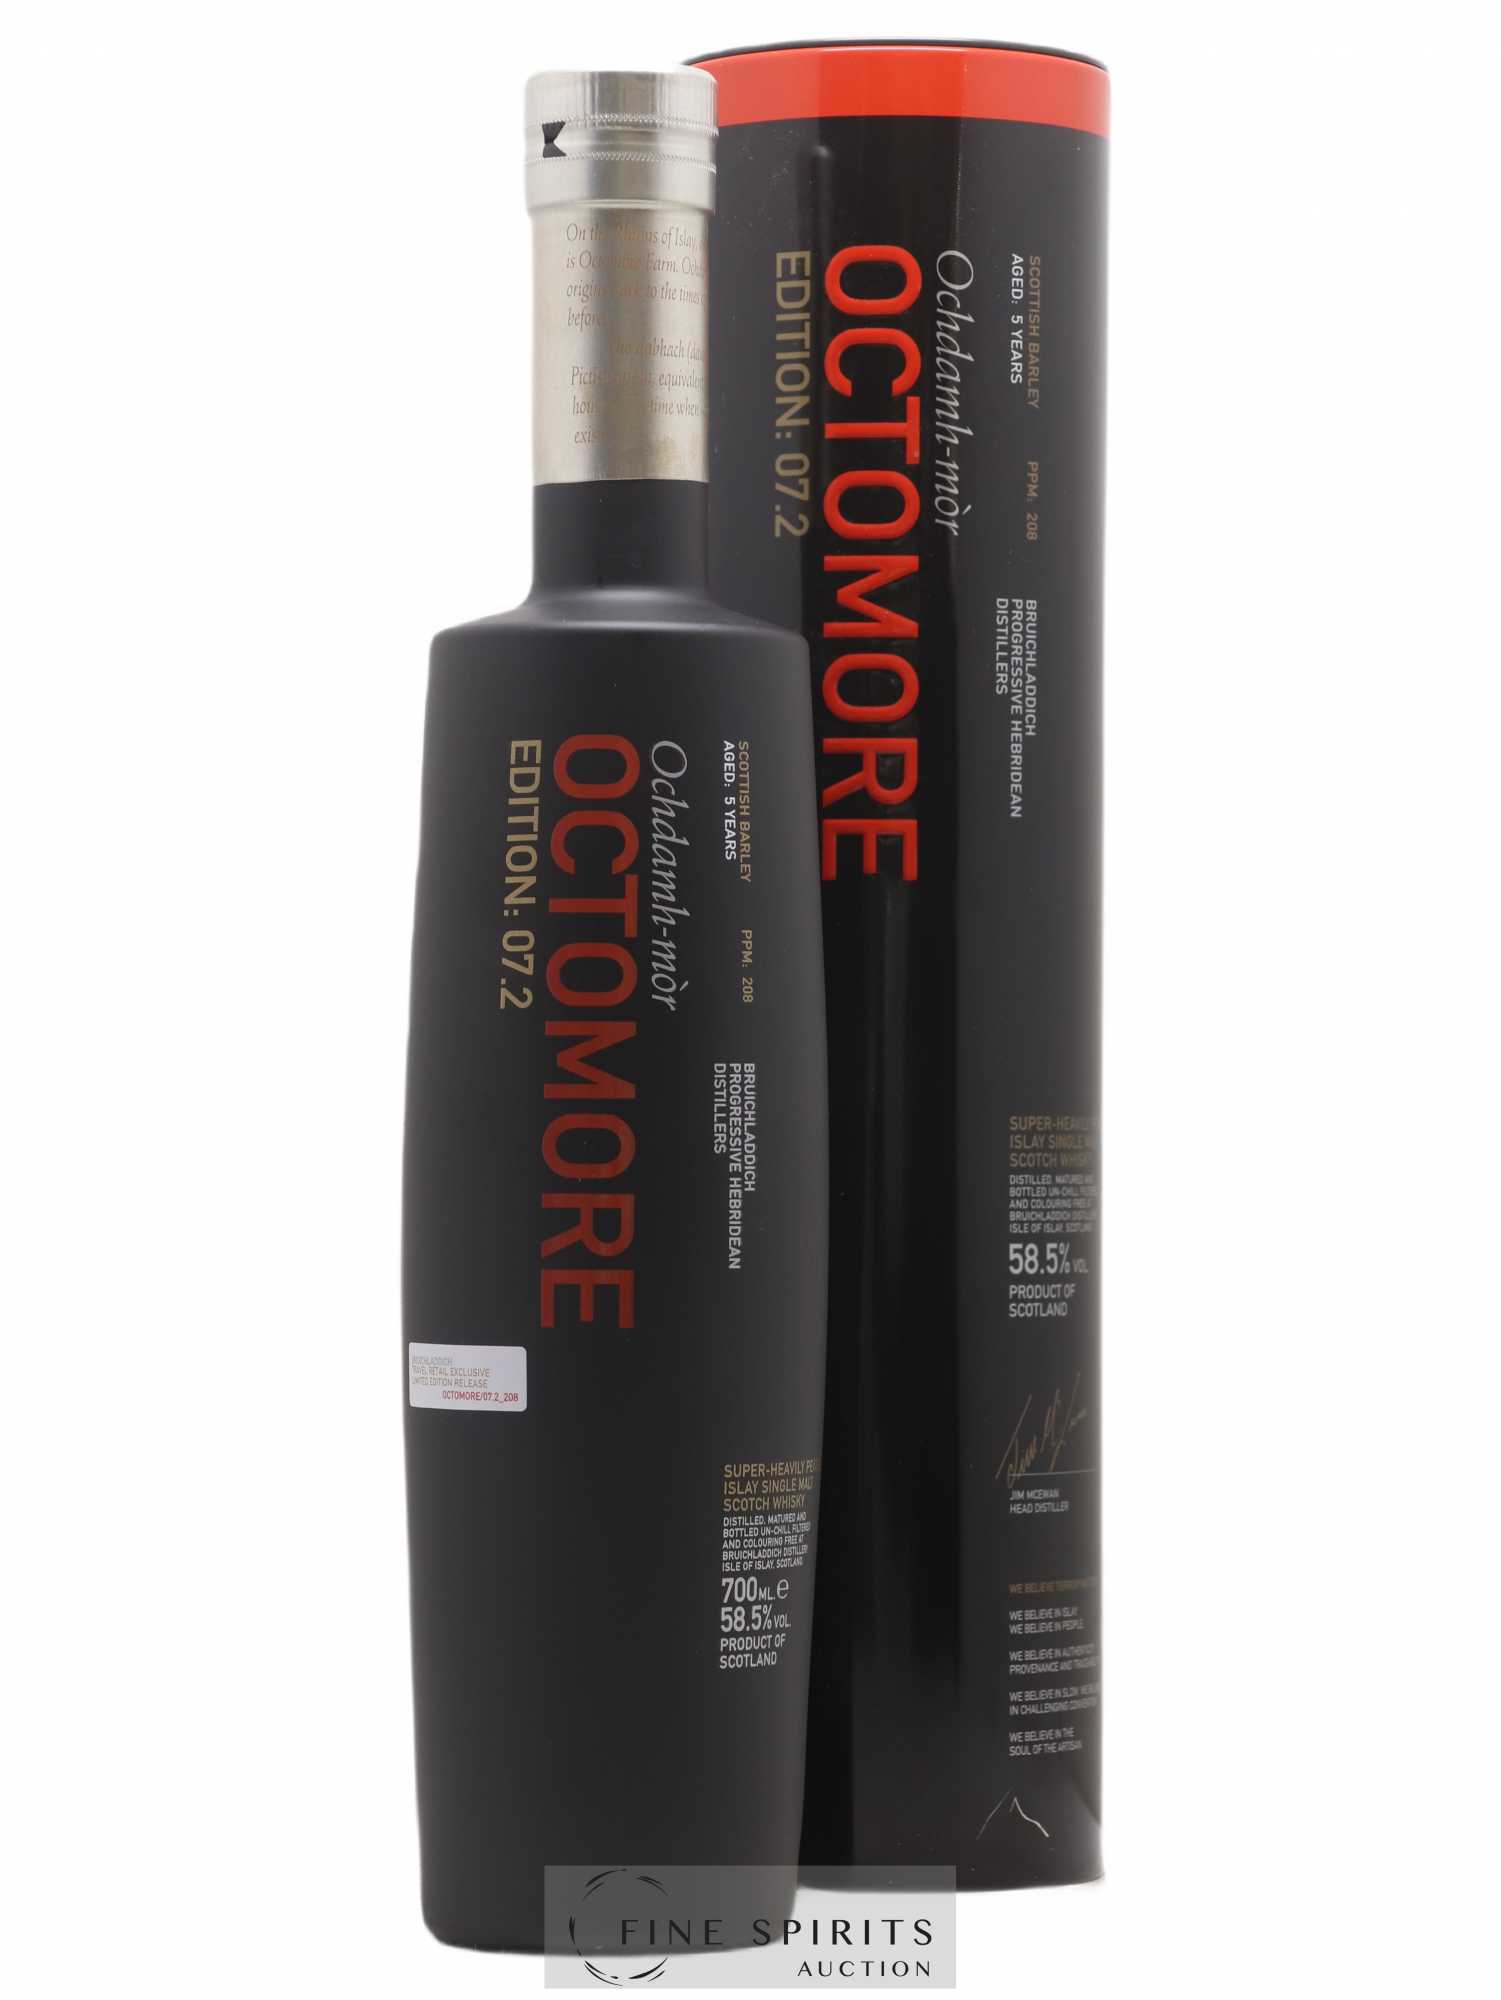 Octomore 5 years Of. Edition 07.2 Scottish Barley Limited Edition 